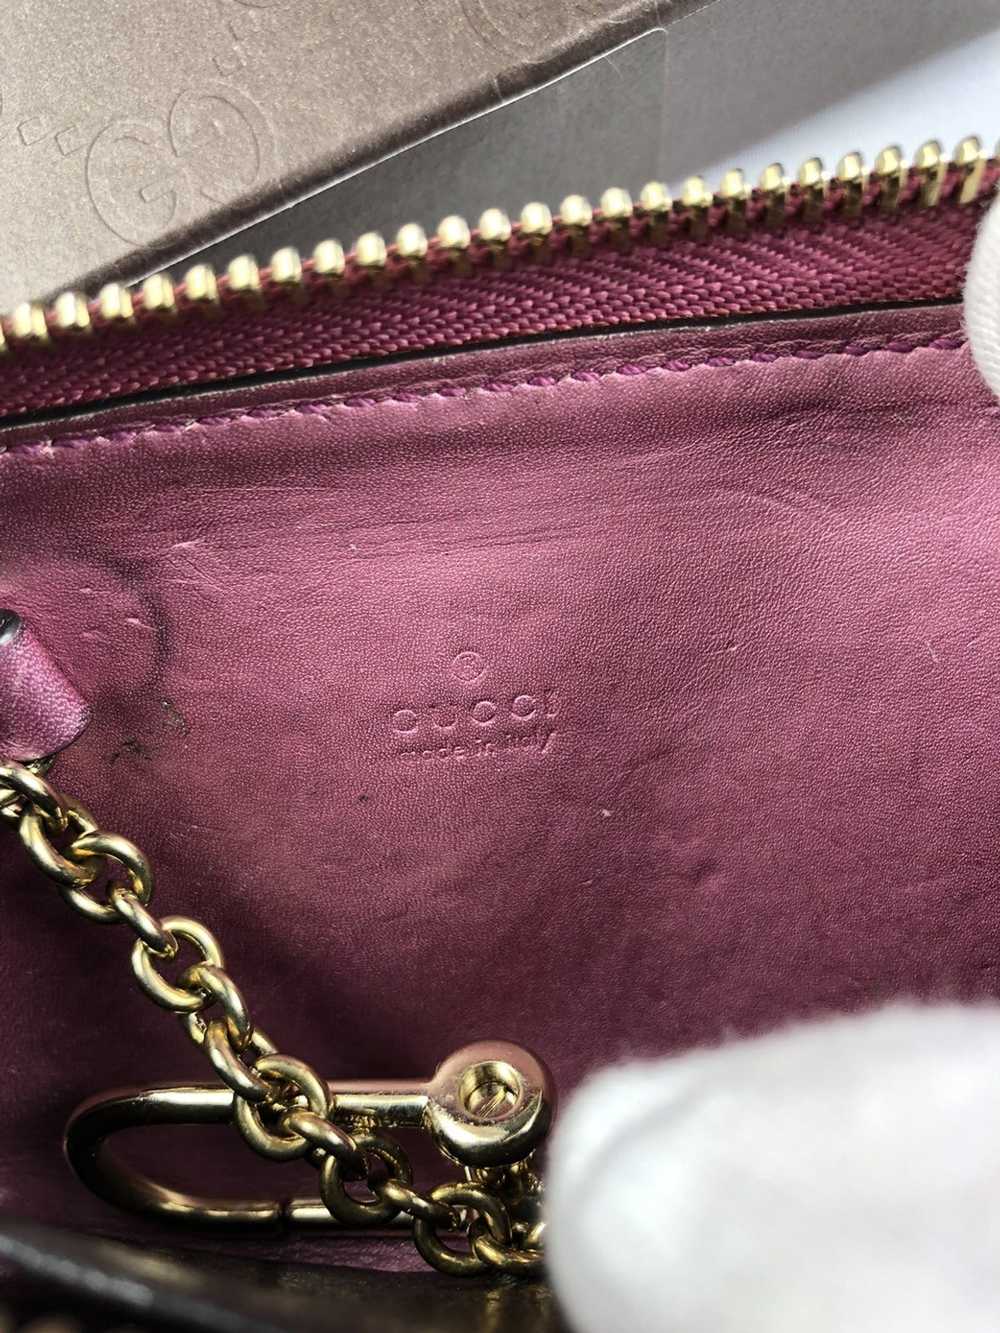 Gucci Gucci gg guccissima leather cles wallet - image 7